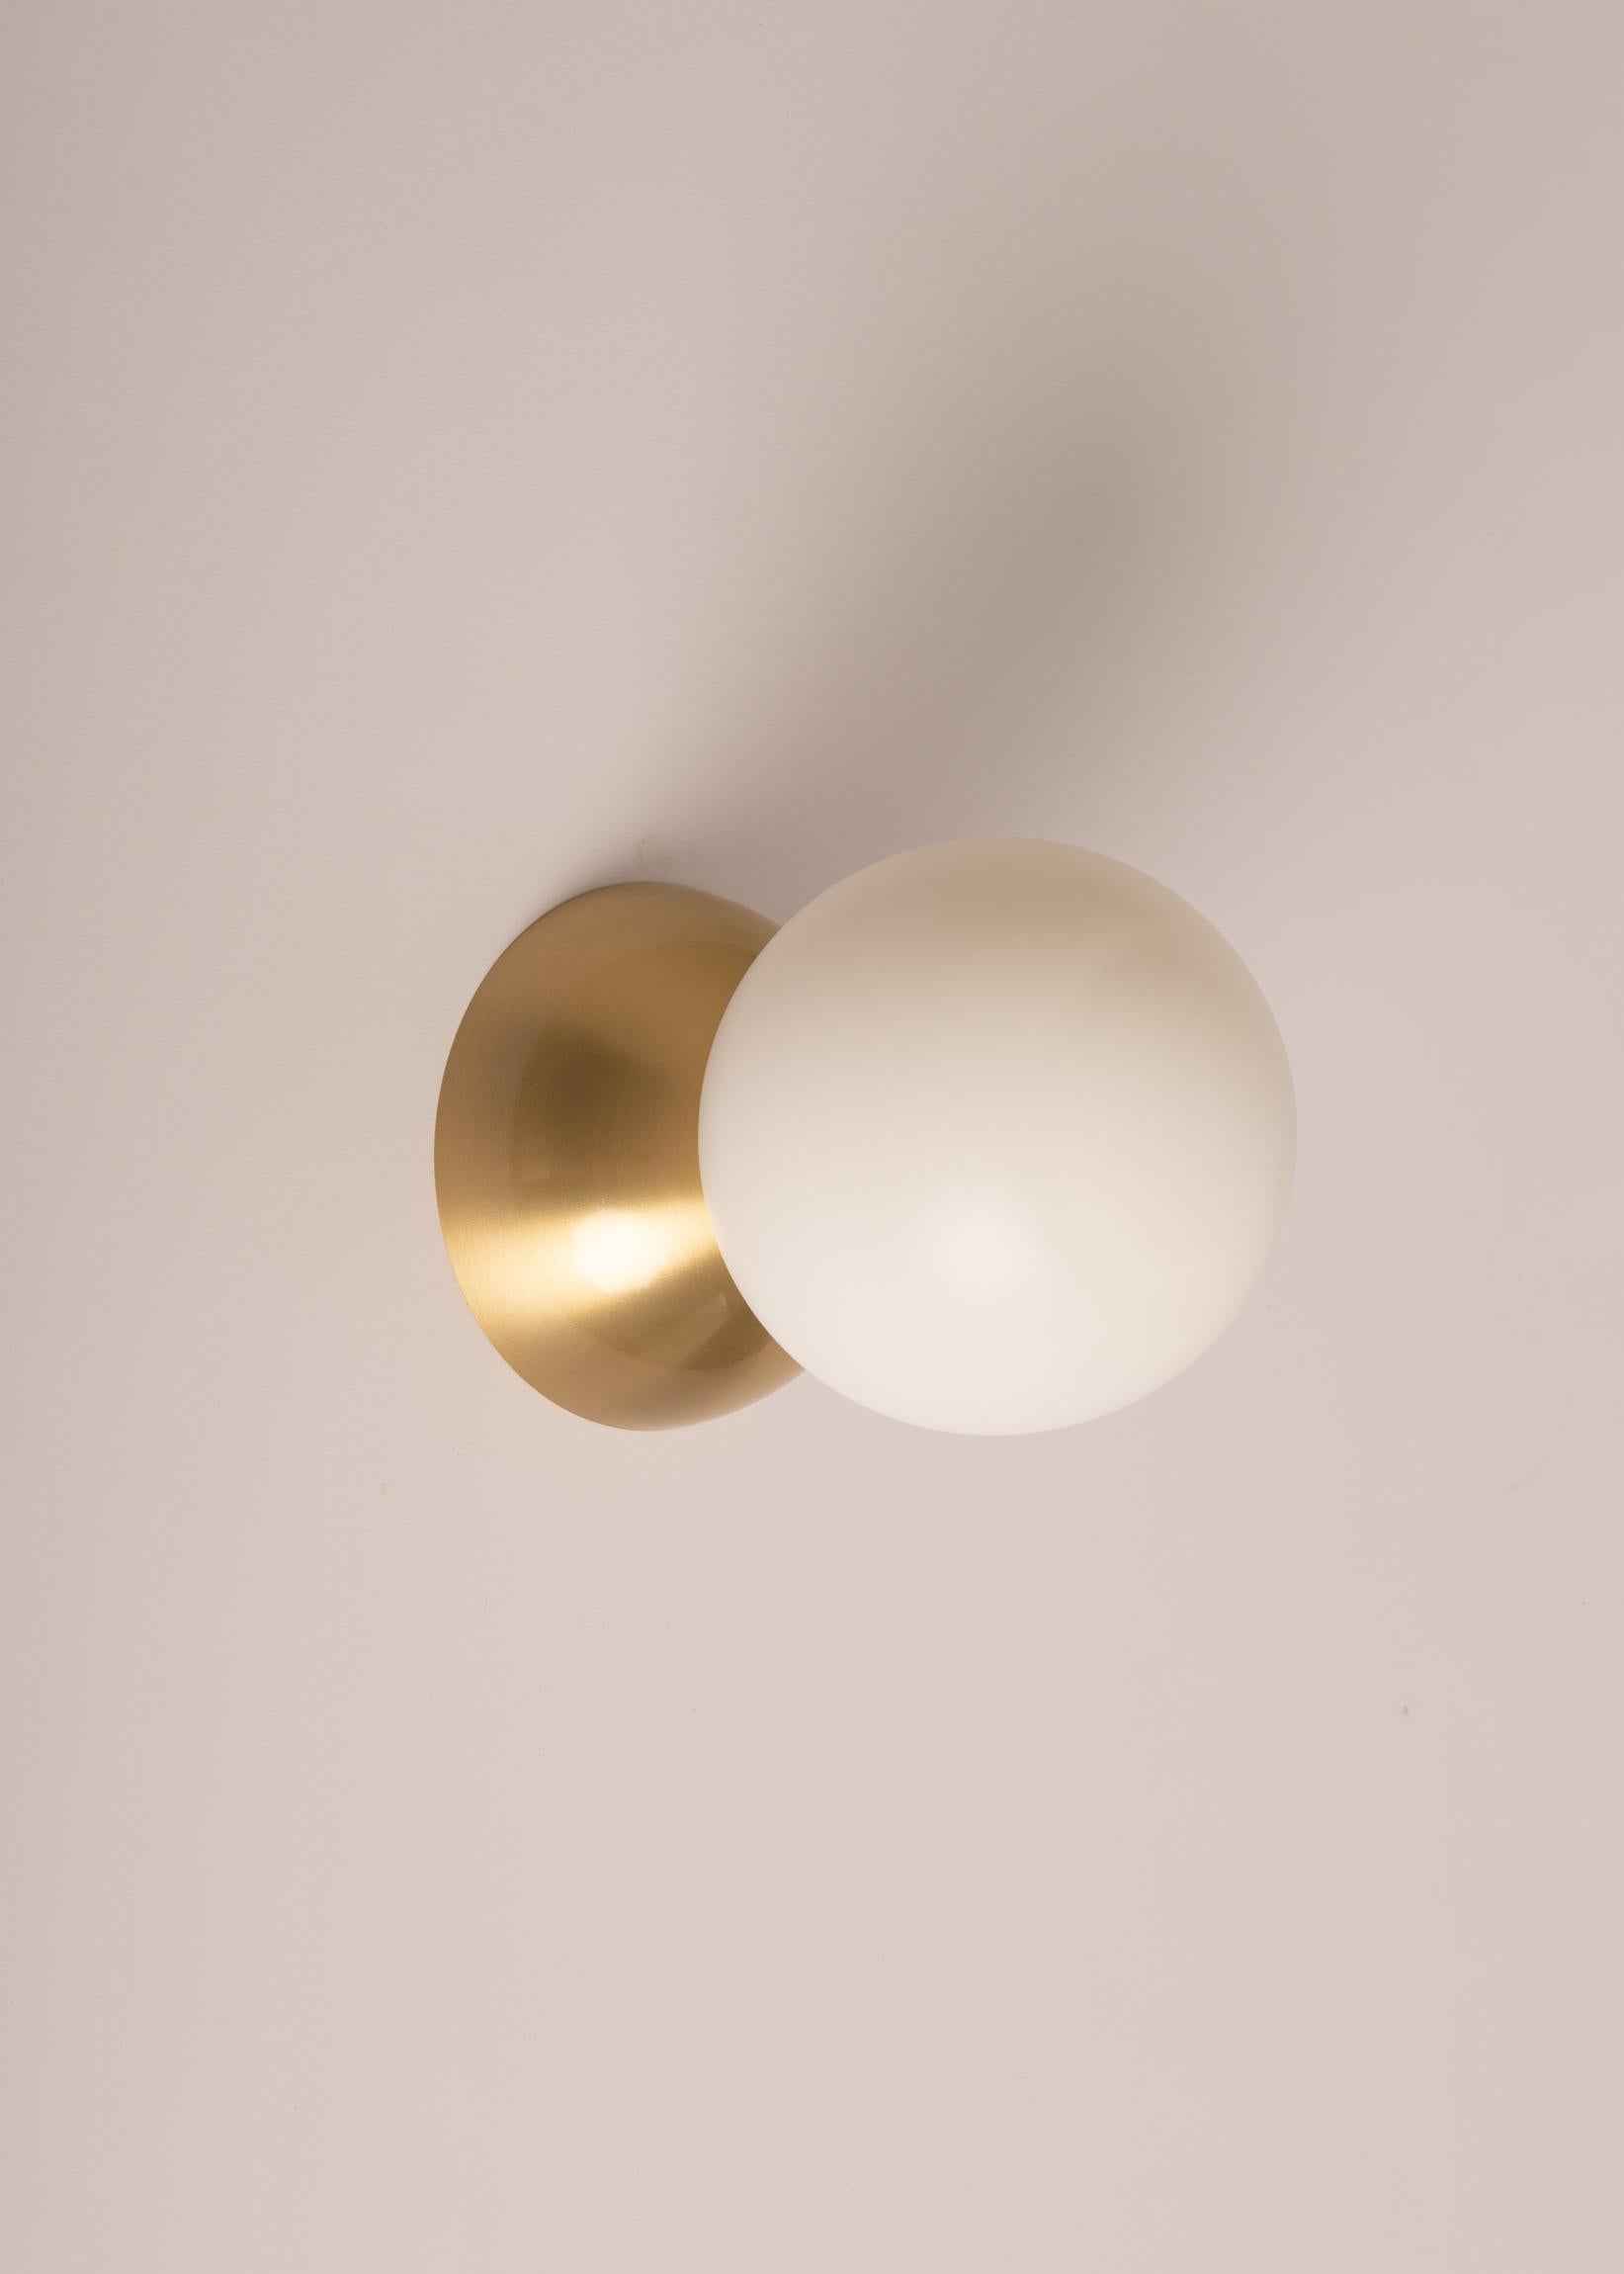 Eklipso Brass Wall Sconce by Simone & Marcel
Dimensions: D 19,5 x W 14 x H 14 cm.
Materials: Brass and glass.

Available in different marble, brass, steel and alabaster options and finishes. Custom options available on request. Please contact us.